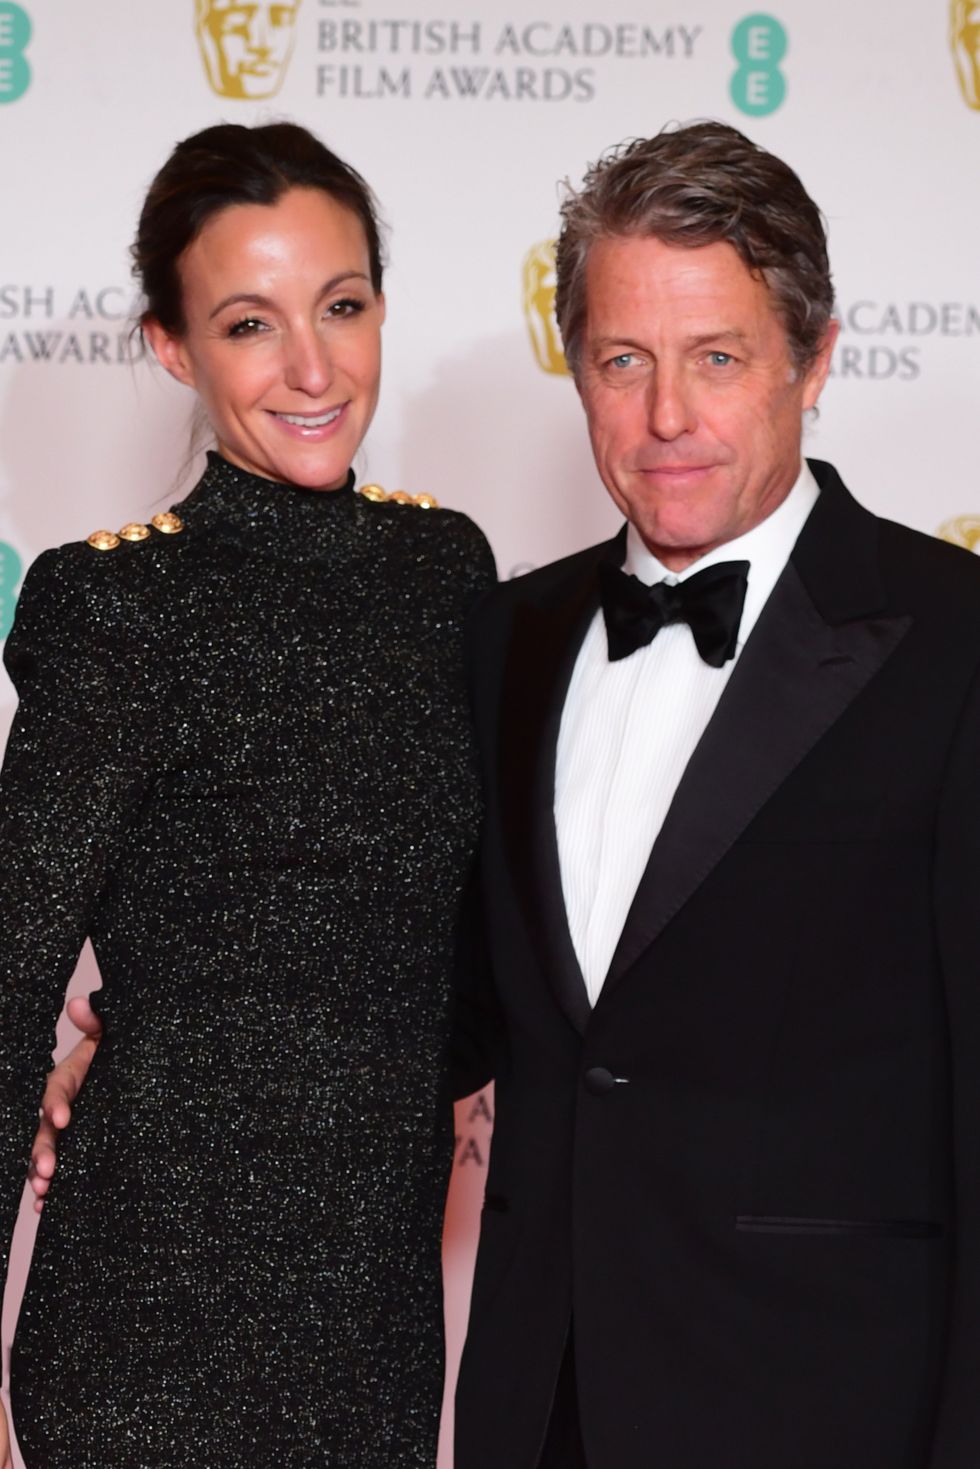 Hugh Grant and his wife Anna donate £10,000 to appeal amid cost-of-living crisis